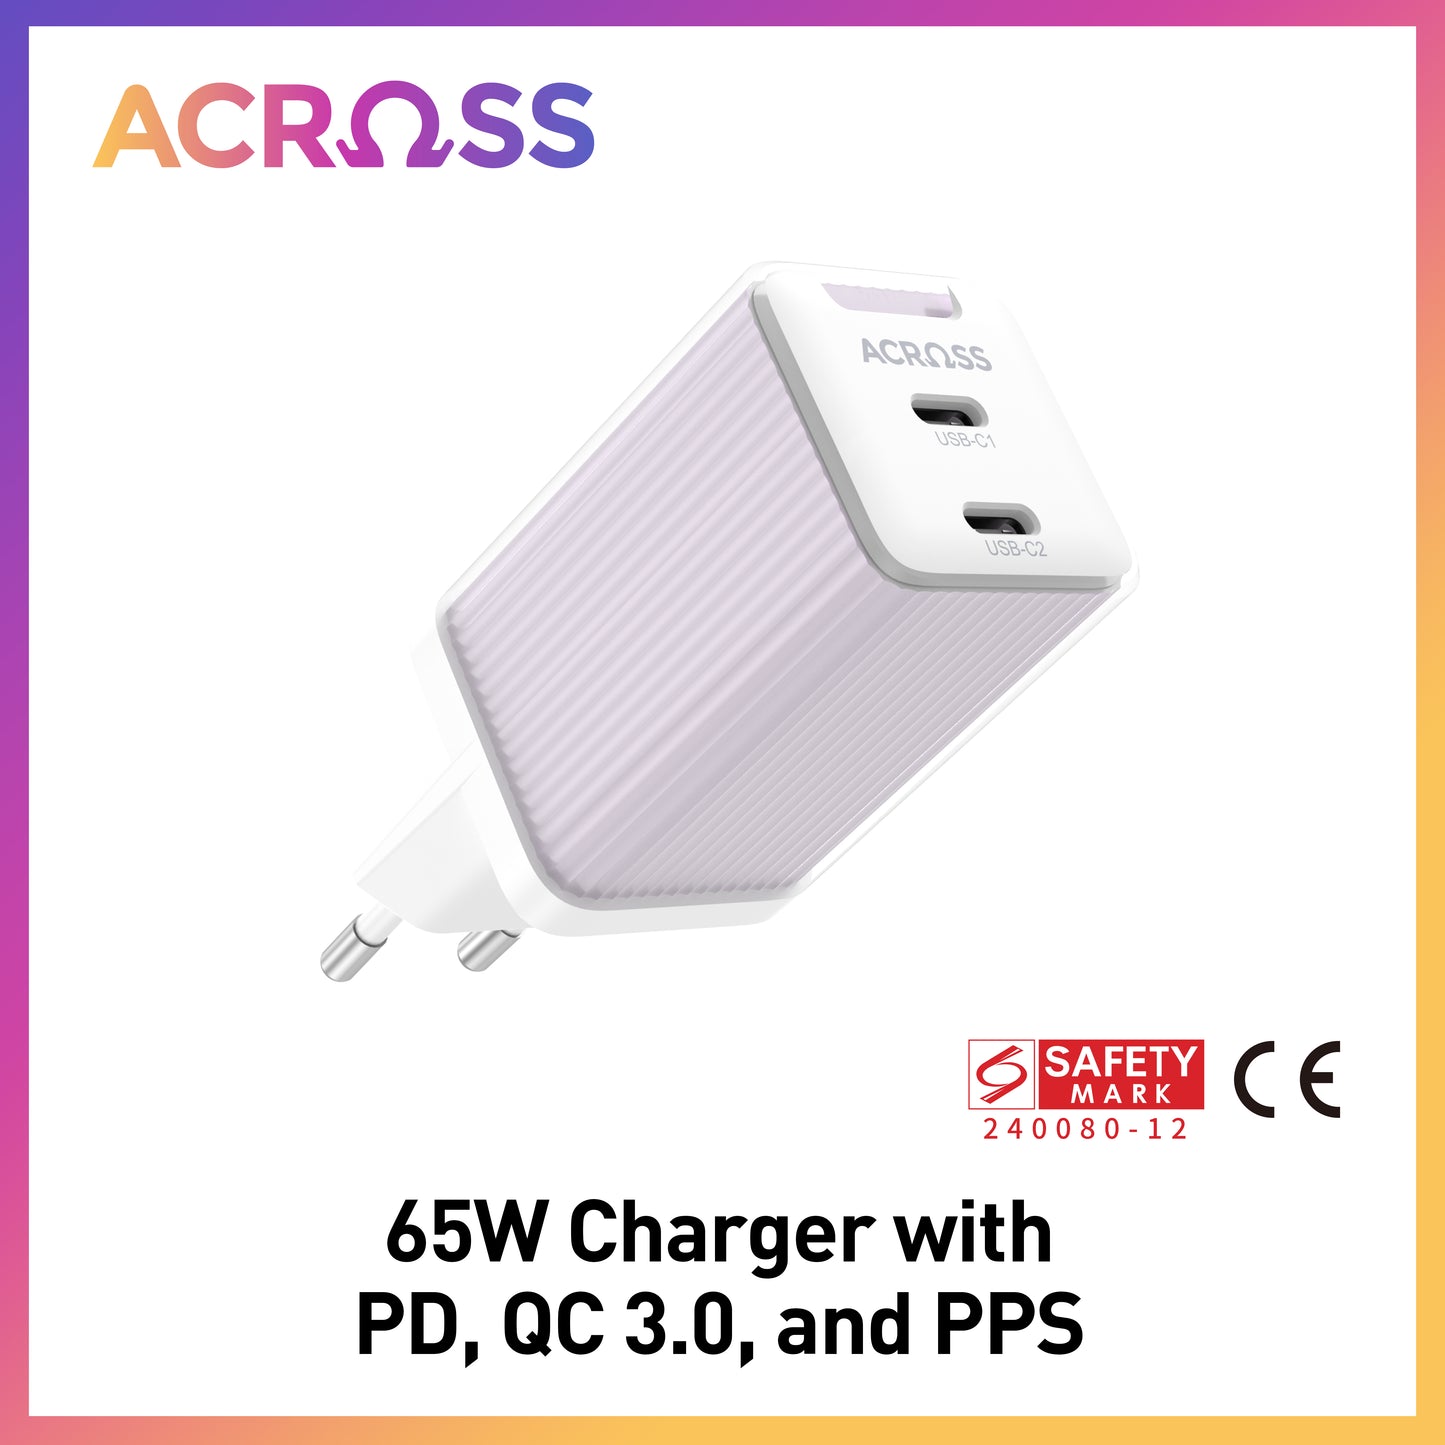 Across SpeedCharge 65W 2-Ports charger with PD, QC 3.0 and PPS - EU Version